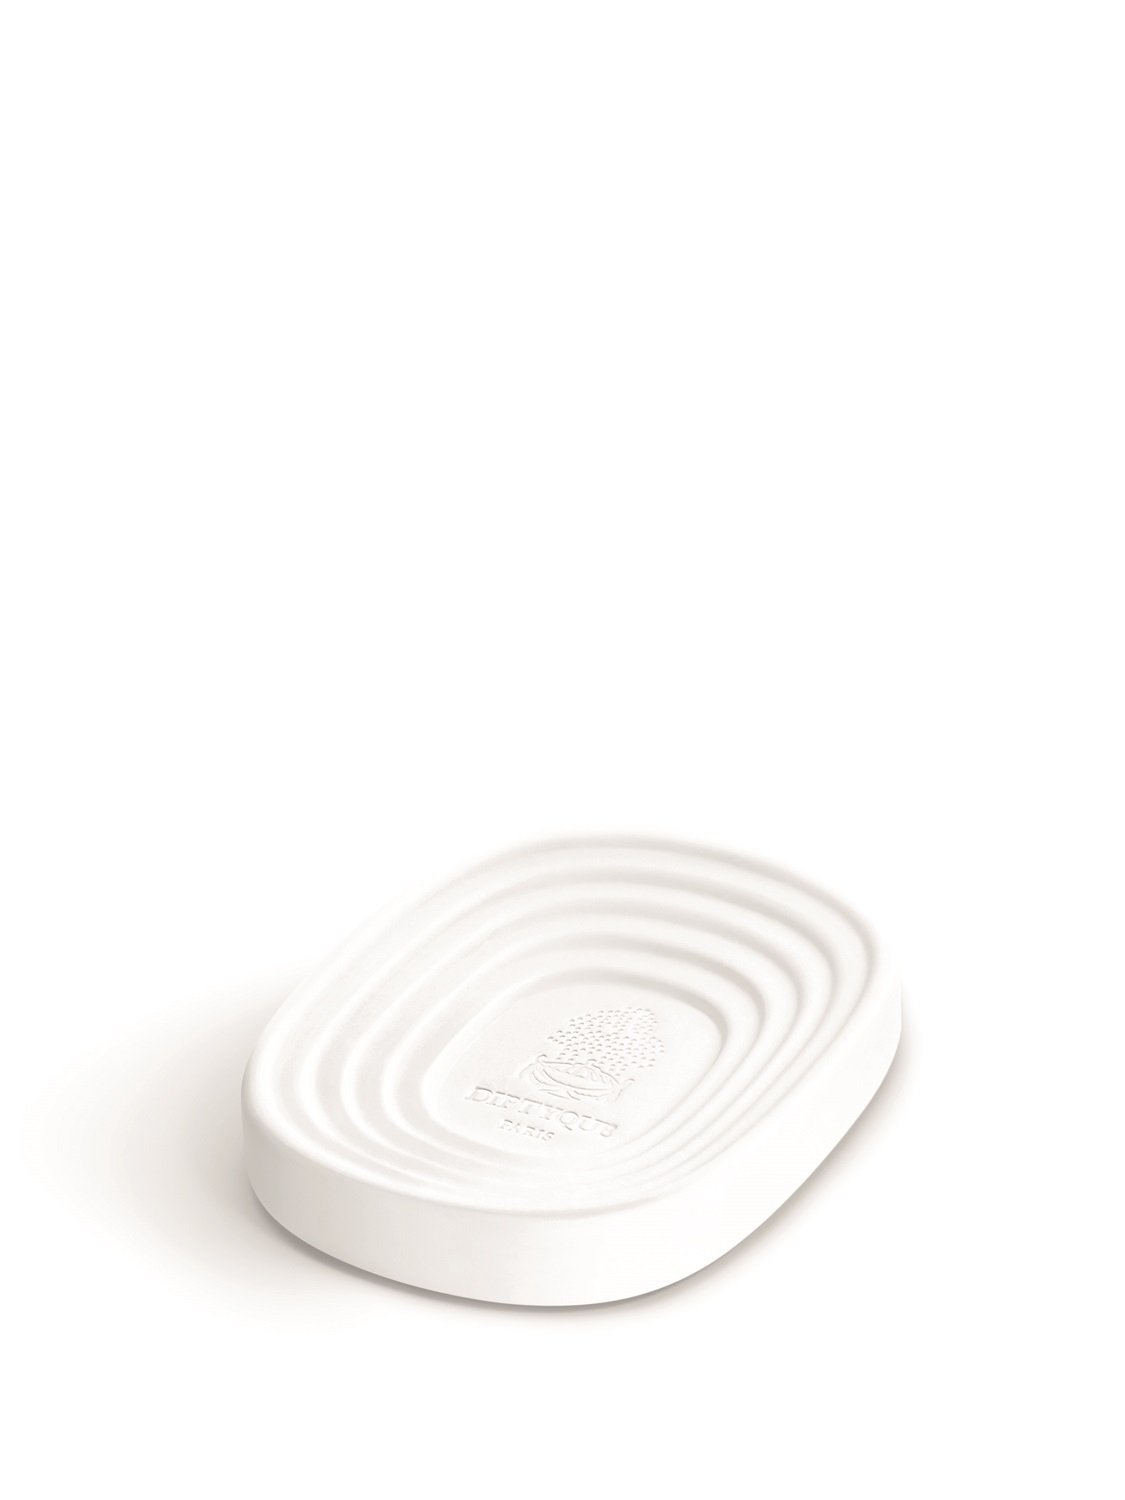 diptyque-ovale-soap-tray-DECO01370-3.jpg